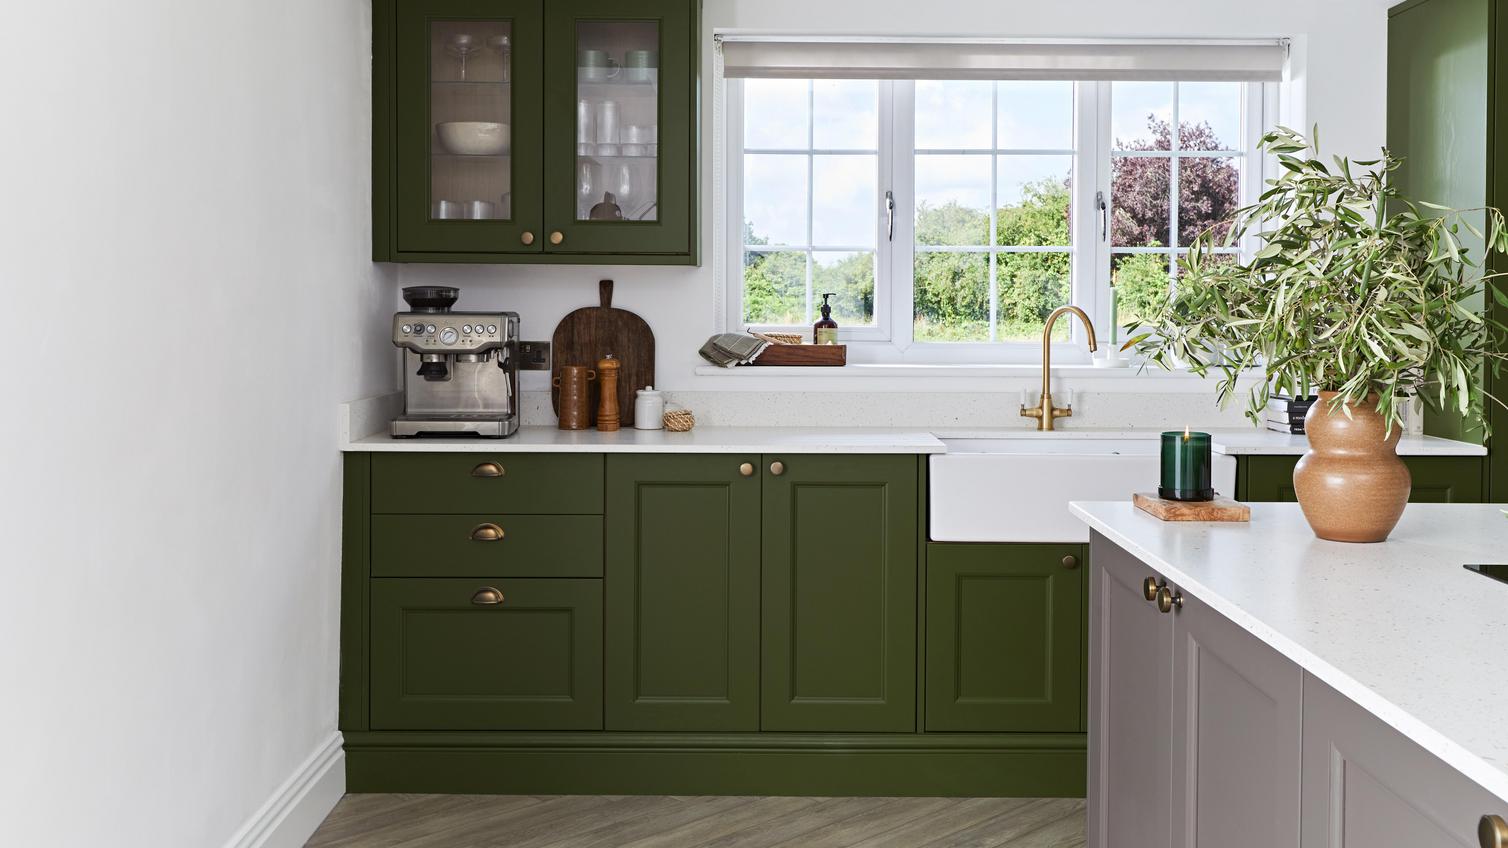 A green shaker kitchen in an olive tone. It has brass accessories, glass wall cabinets, and white worktops.